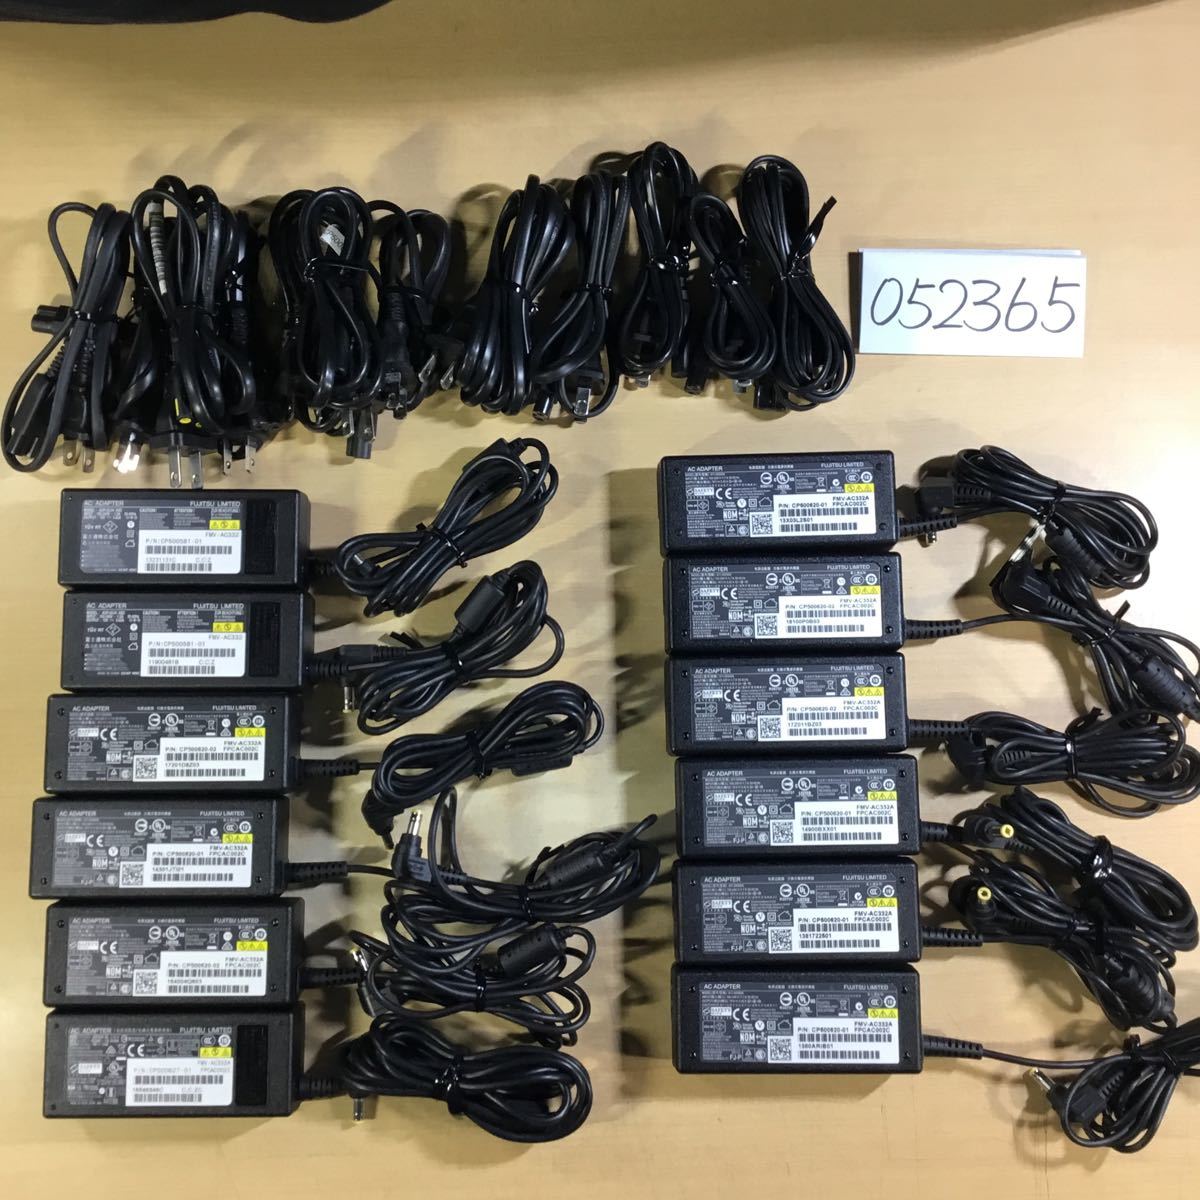 (052365) FUJITSU FMV-AC332 / FMV-AC332A 19V3.42A genuine products 12 piece set AC adapter free shipping secondhand goods 